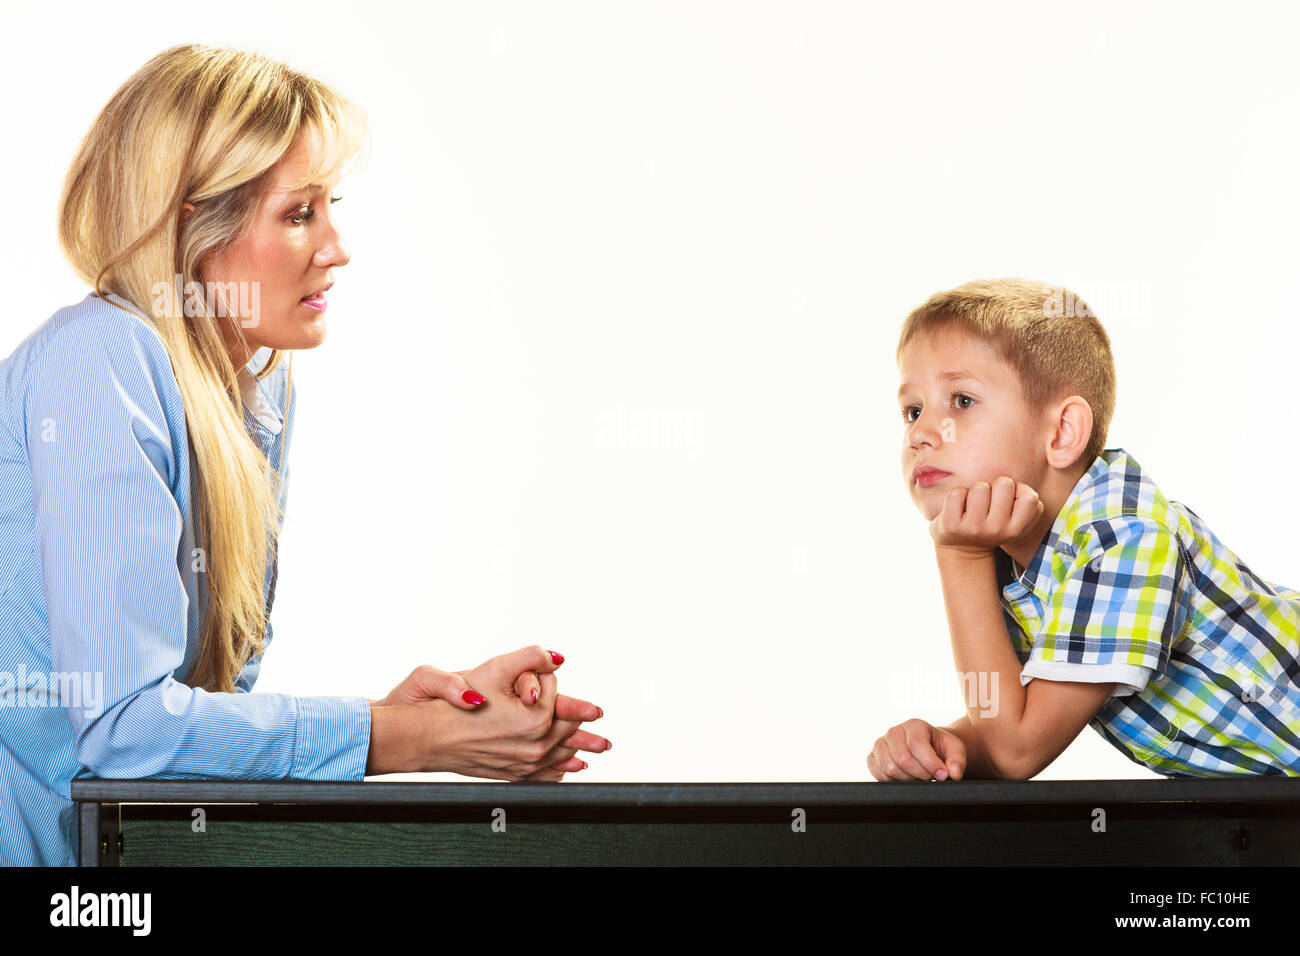 Mother talking with son. Children upbringing. Stock Photo